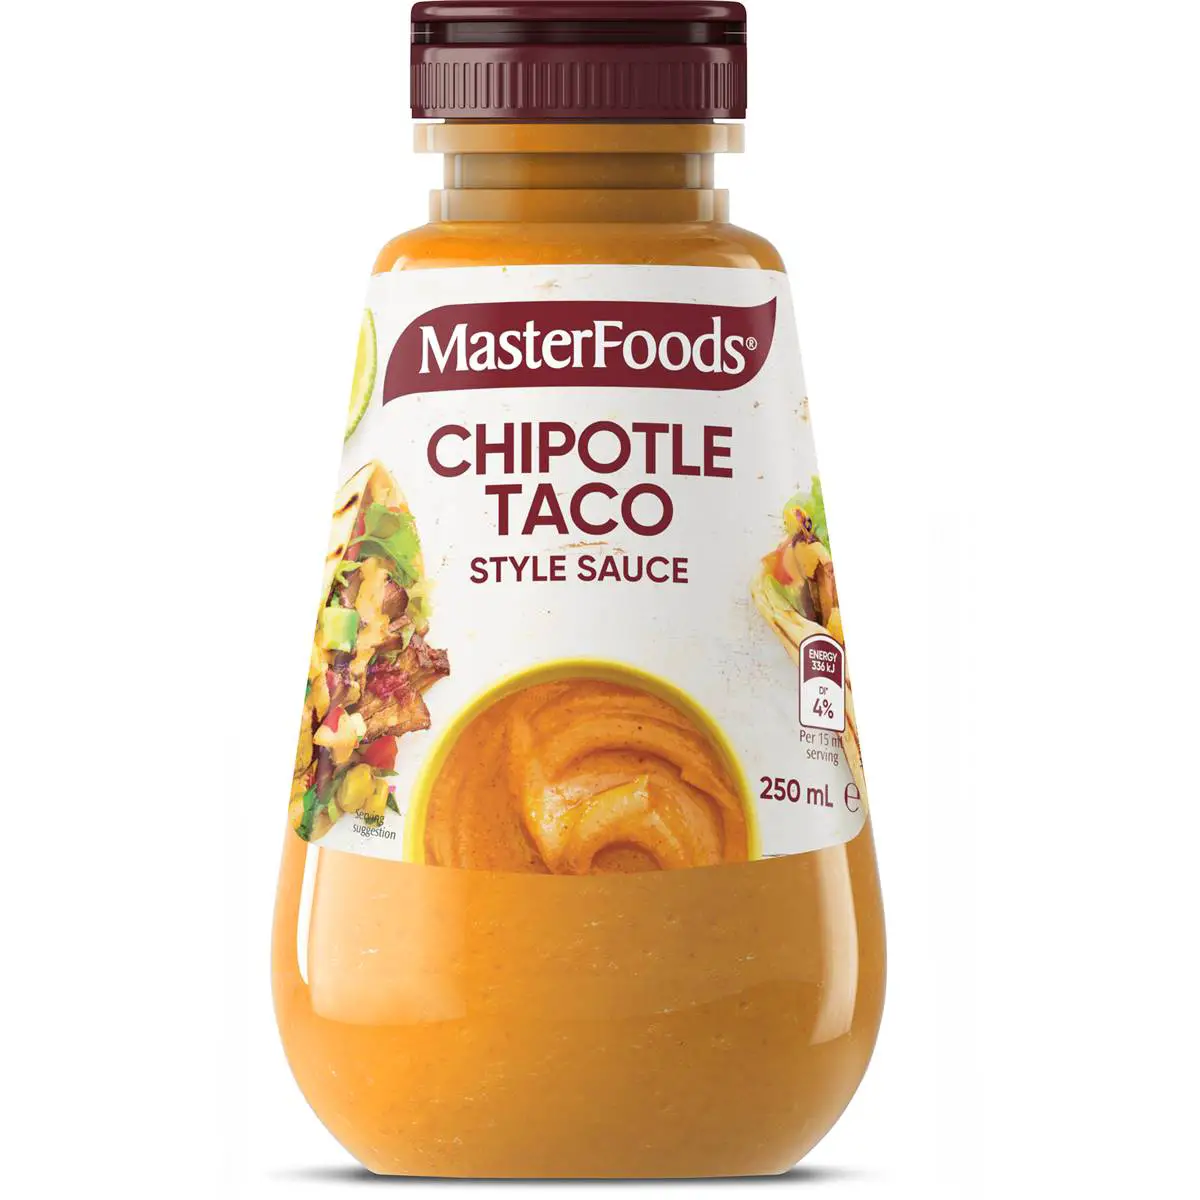 Masterfoods Chipotle Taco Style Sauce 250ml